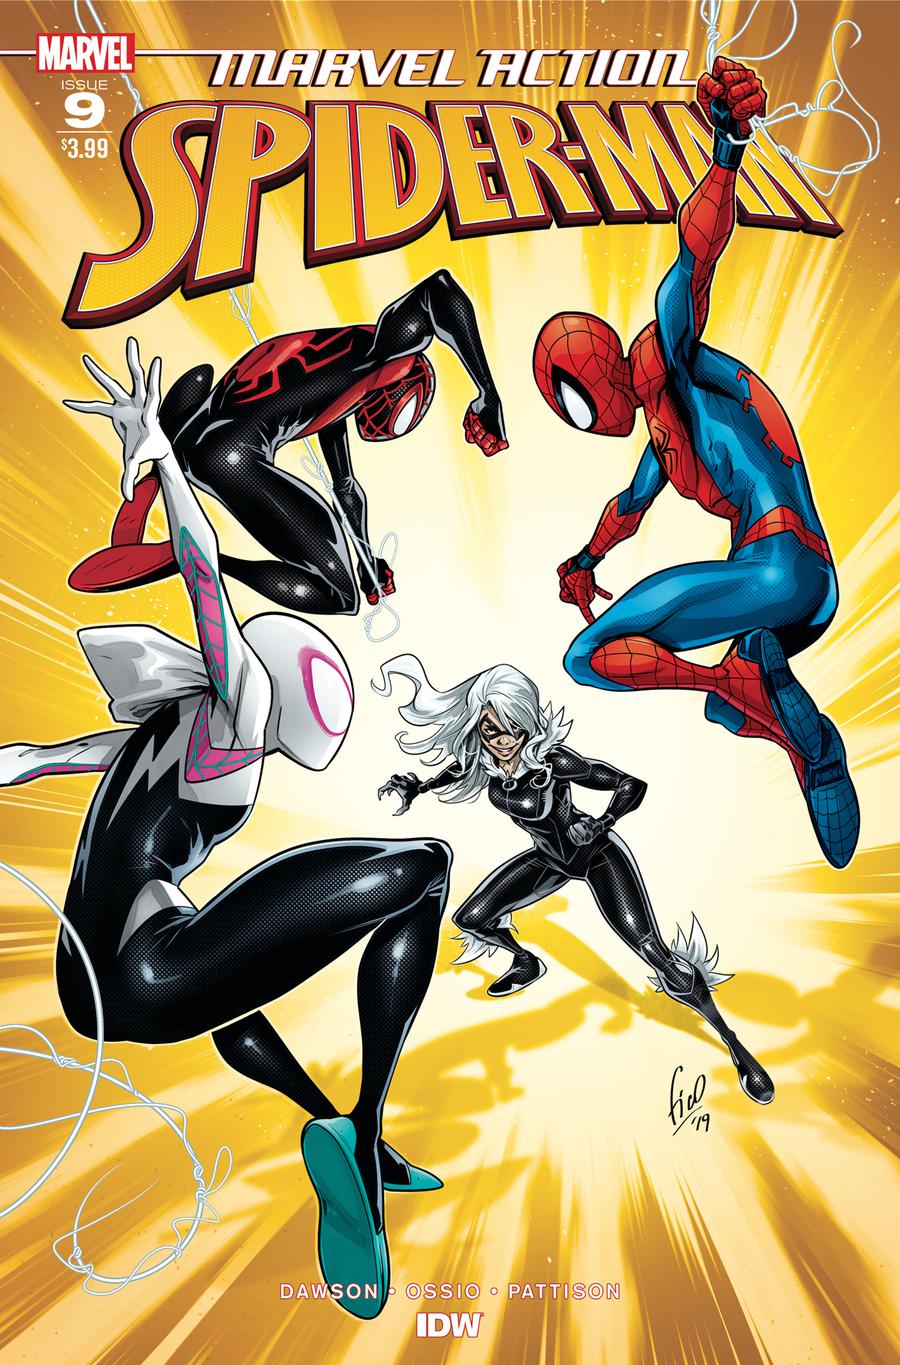 Marvel Action Spider-Man #9 Cover A Regular Fico Ossio Cover